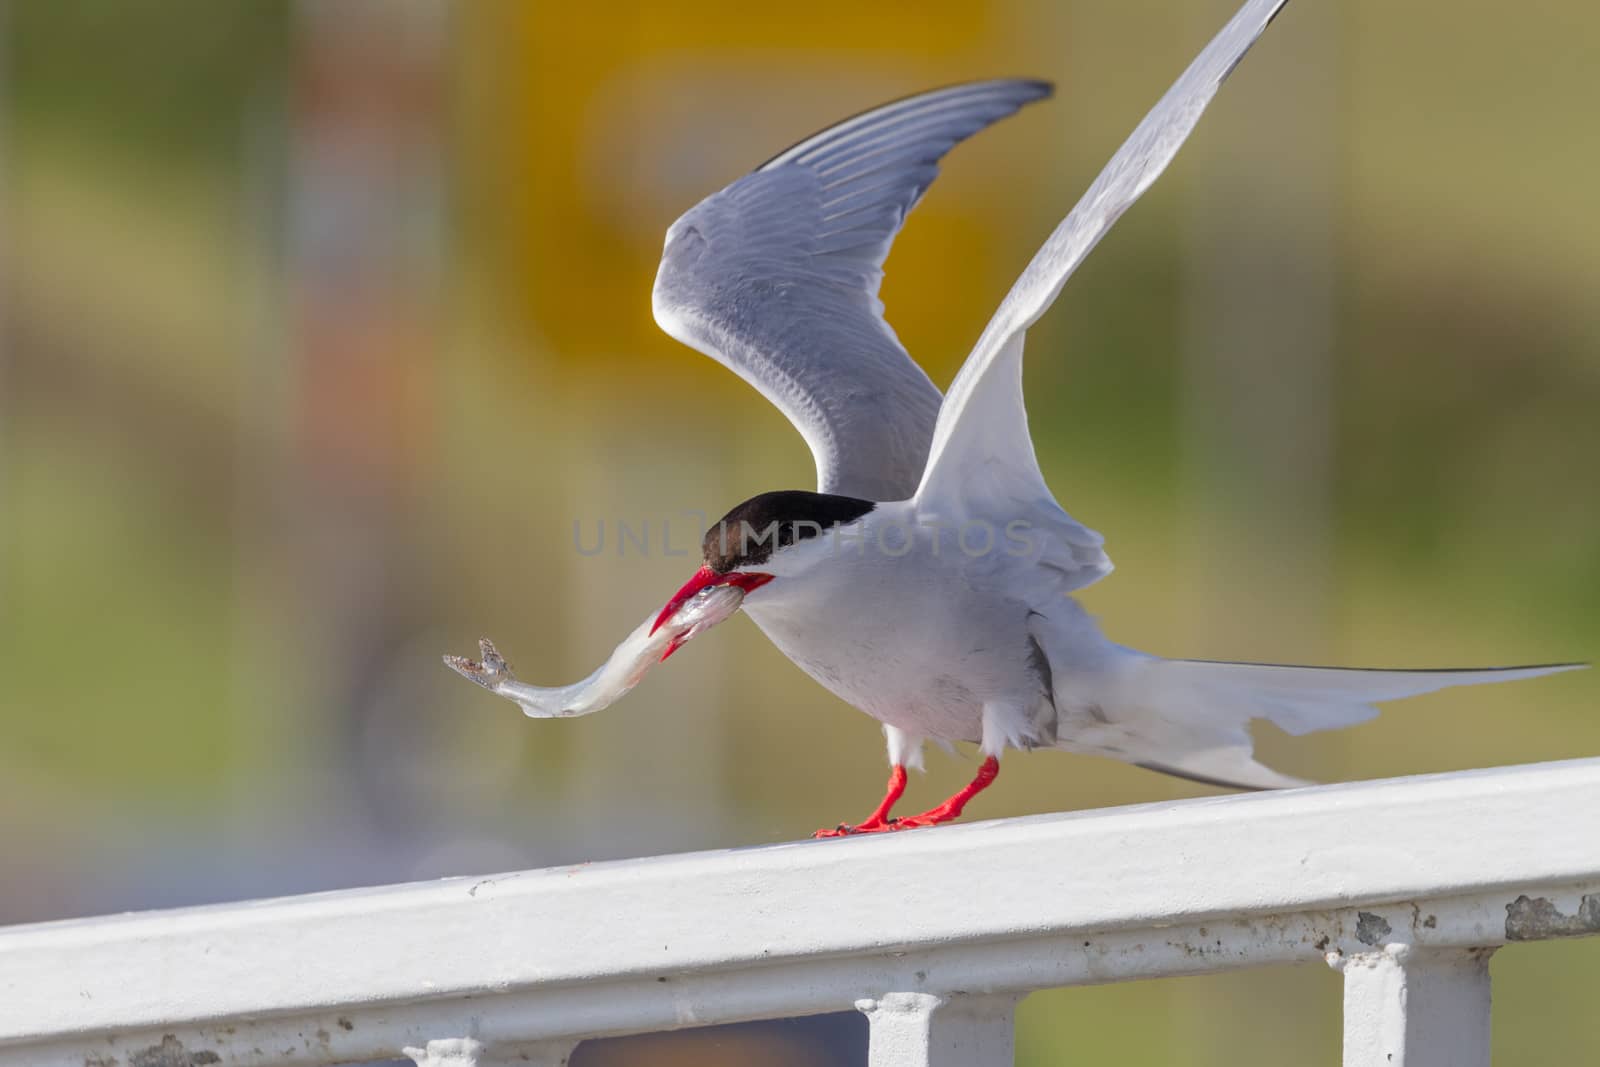 An Arctic tern (Sterna paradisaea). This is a seabird of the tern family Sternidae. A picture taken in the area of the Wadden Sea, on the Wasser- u. Schiffahrtsamt Tönning Eidersperrwerk in Germany.